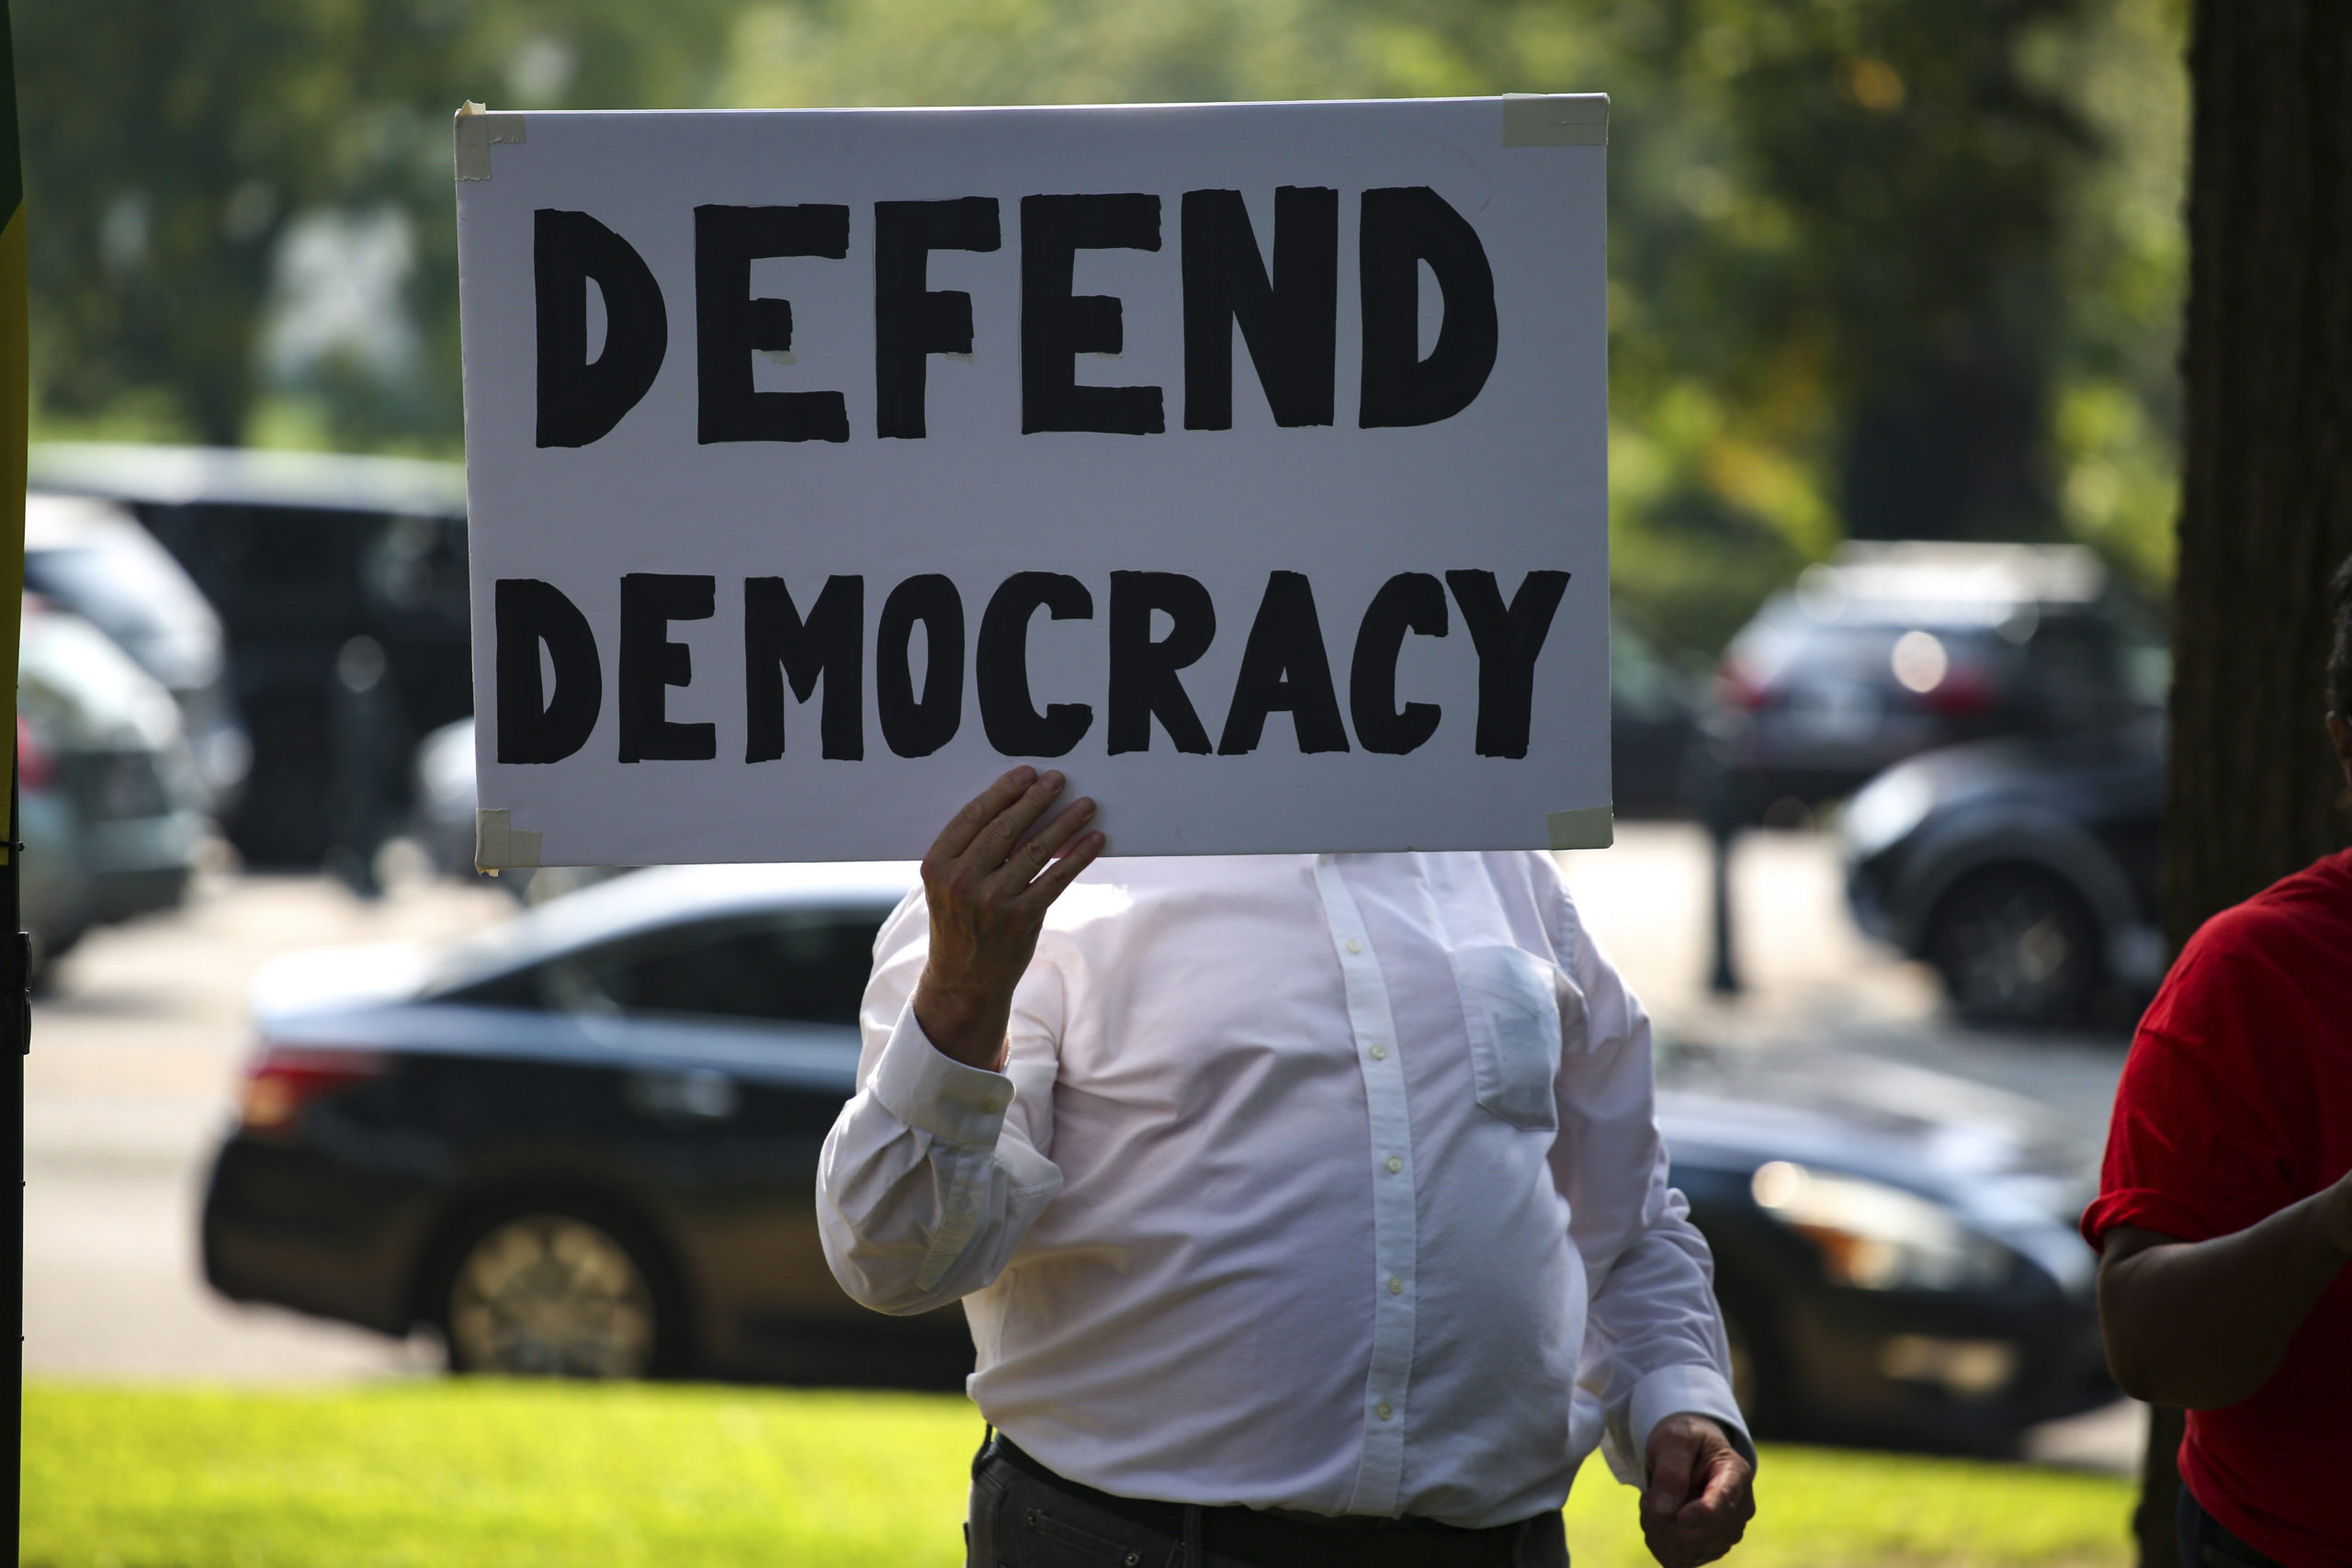 People watch and hold signs as members of Congress speak at a voting rights rally near U.S. Senate office buildings in Washington, D.C. on September 14, 2021 